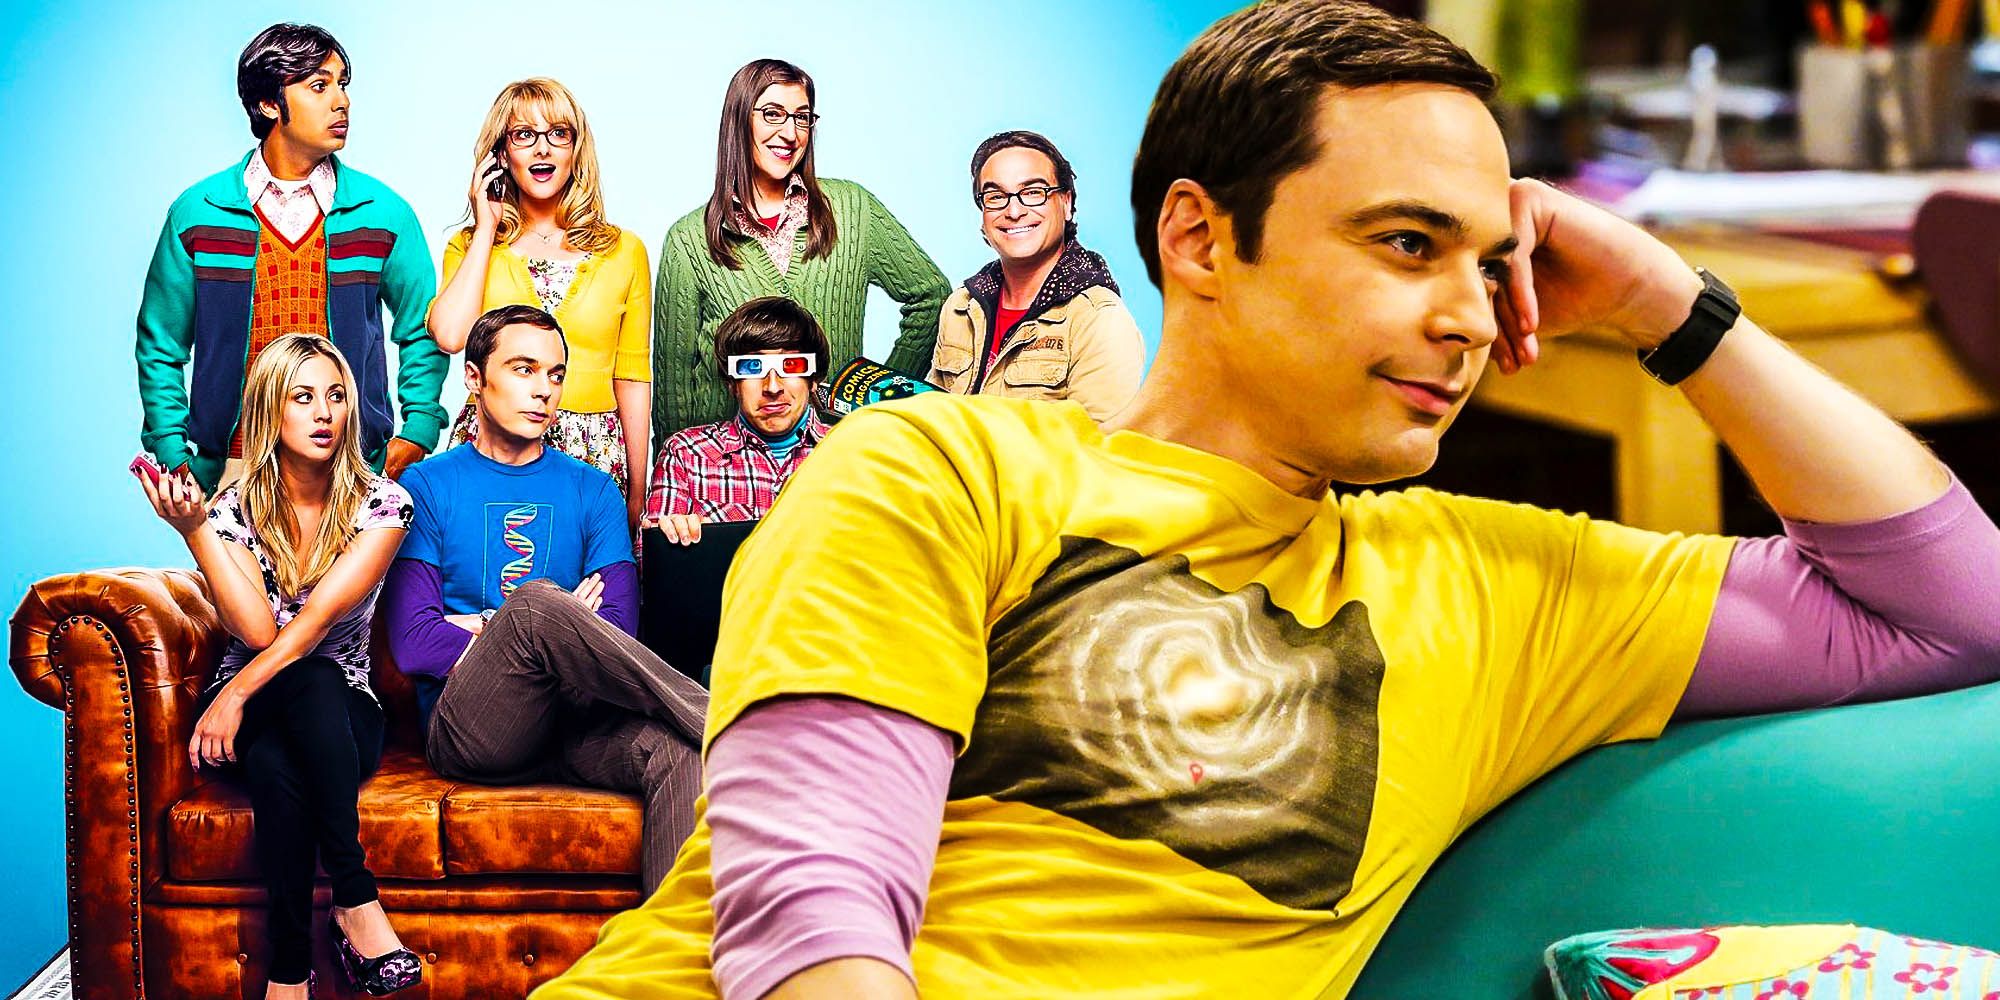 Jim parsons sheldon exit Saved the Big bang theory from destroying itself